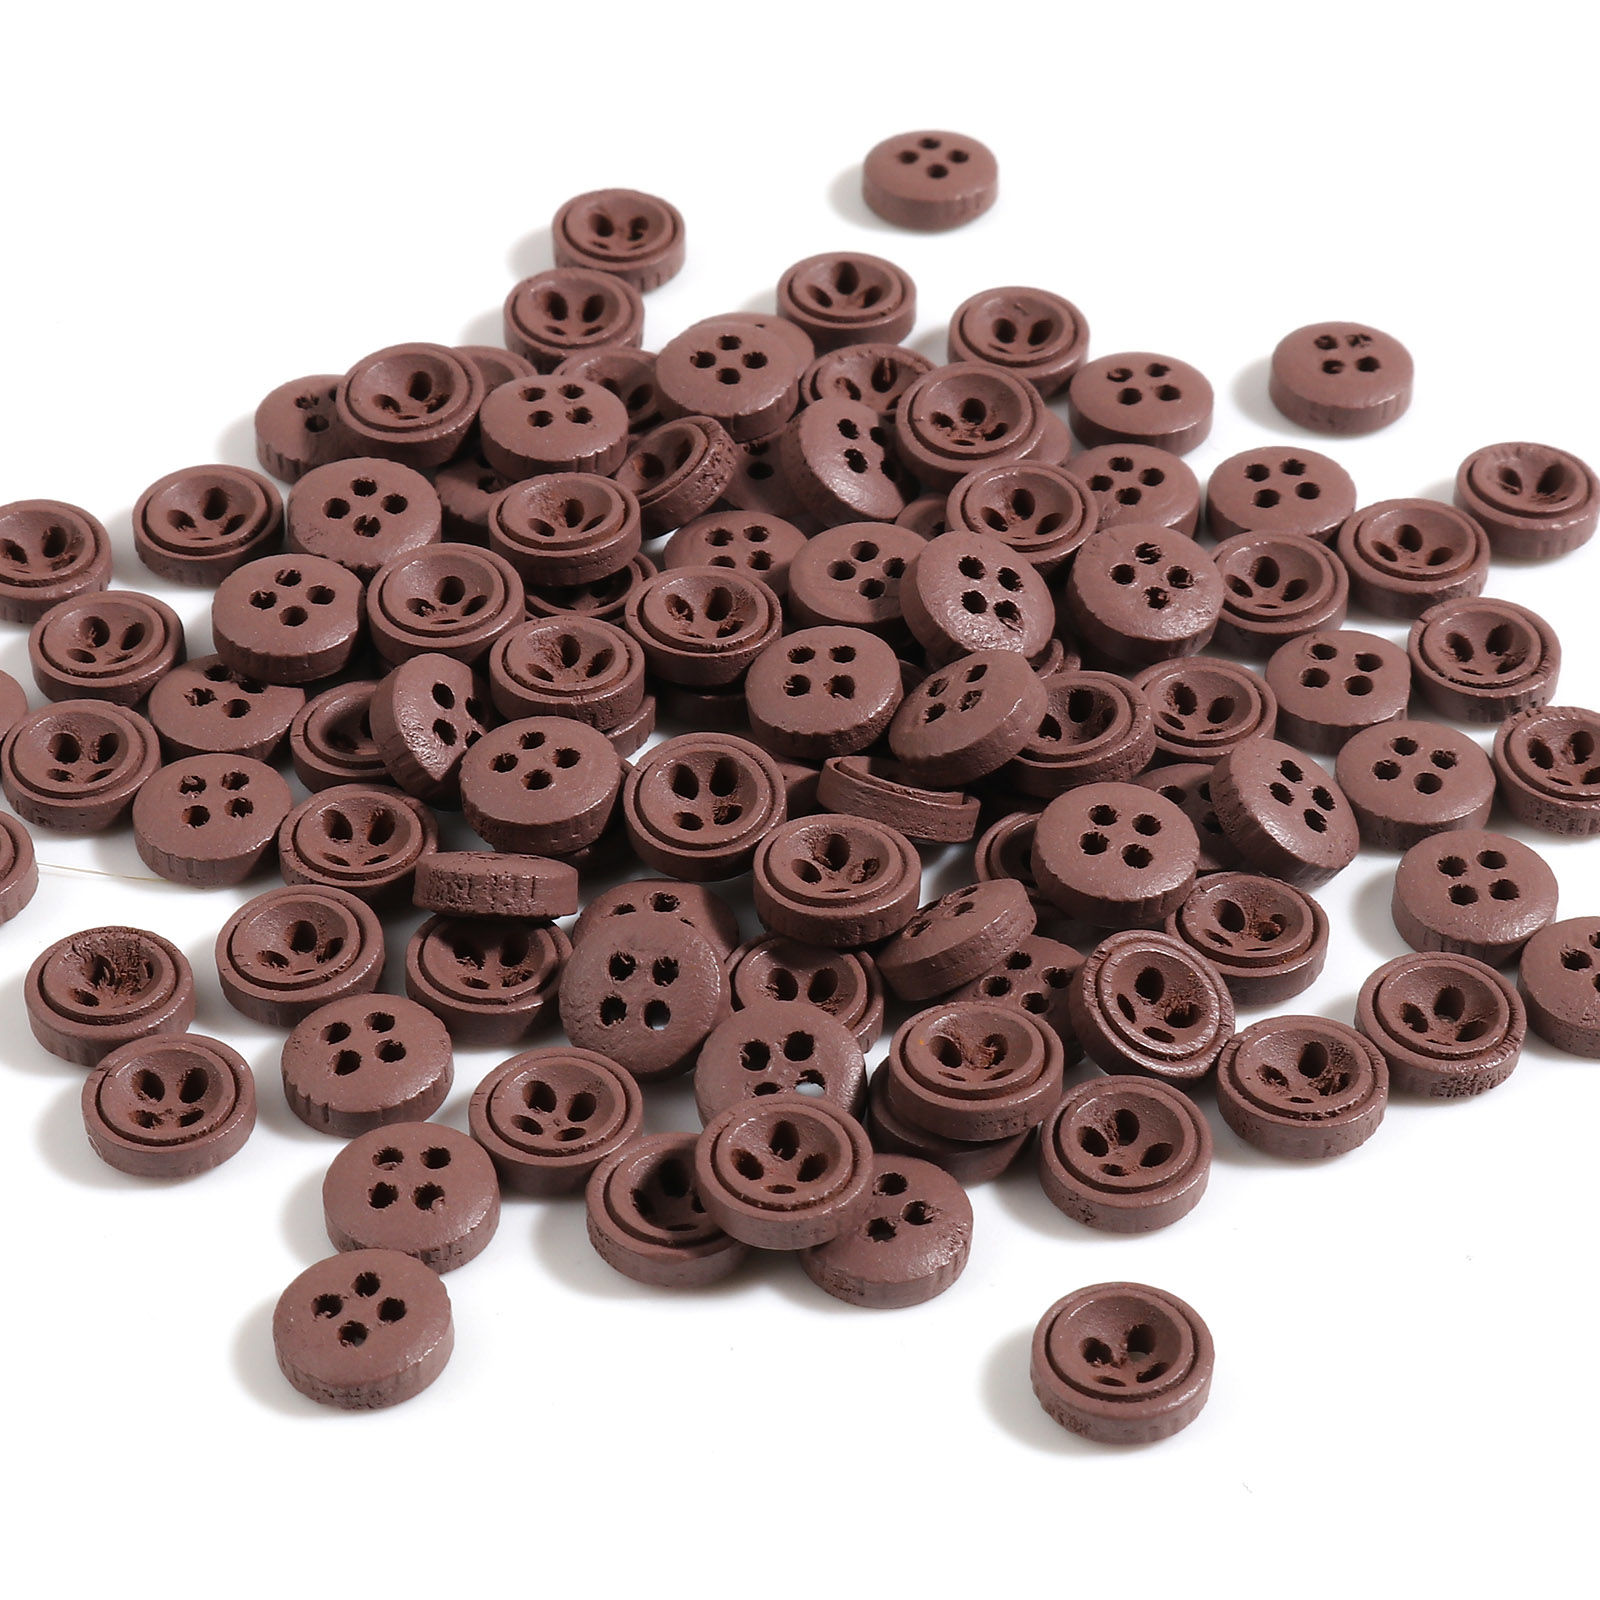 Picture of Wood Sewing Buttons Scrapbooking 4 Holes Round Dark Coffee 9mm Dia., 100 PCs